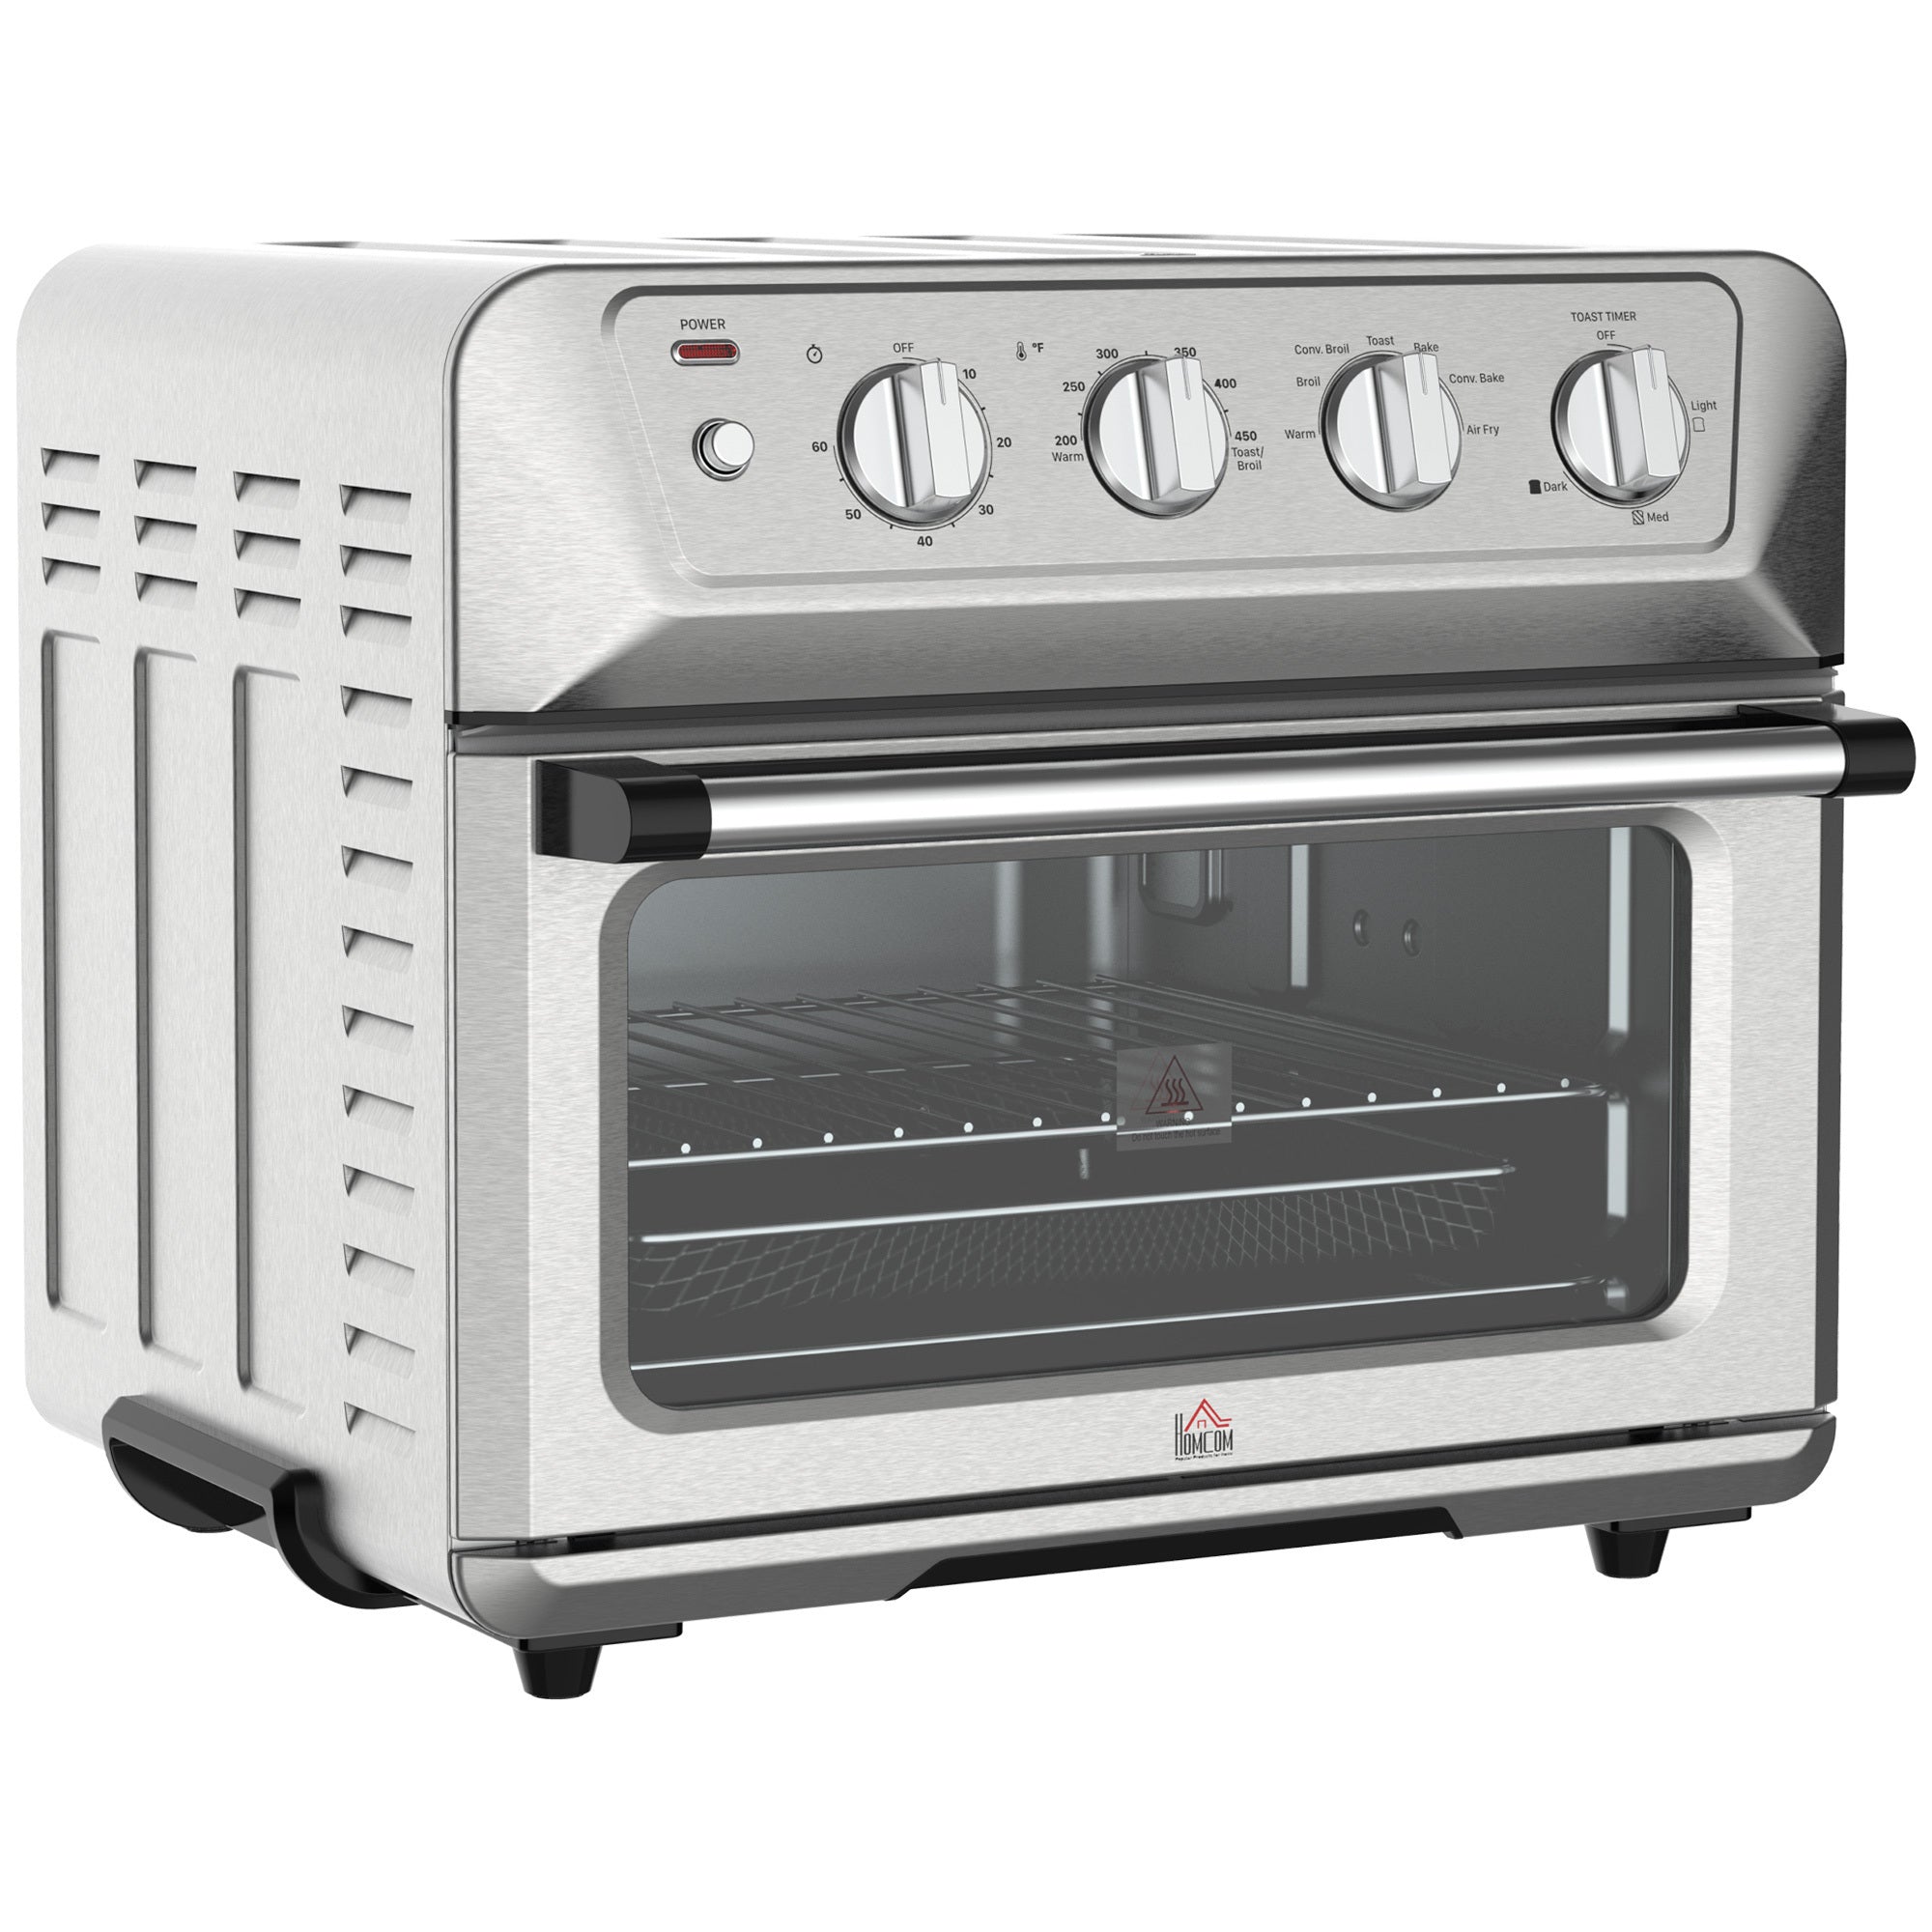 Air-Fryer-Toaster-Oven,-21QT-7-In-1-Convection-Oven-Countertop,-Warm,-Broil,-Toast,-Bake-and-Air-Fry,-4-Accessories-Included,-1800W,-Stainless-Steel-Finish-kitchen-appliance